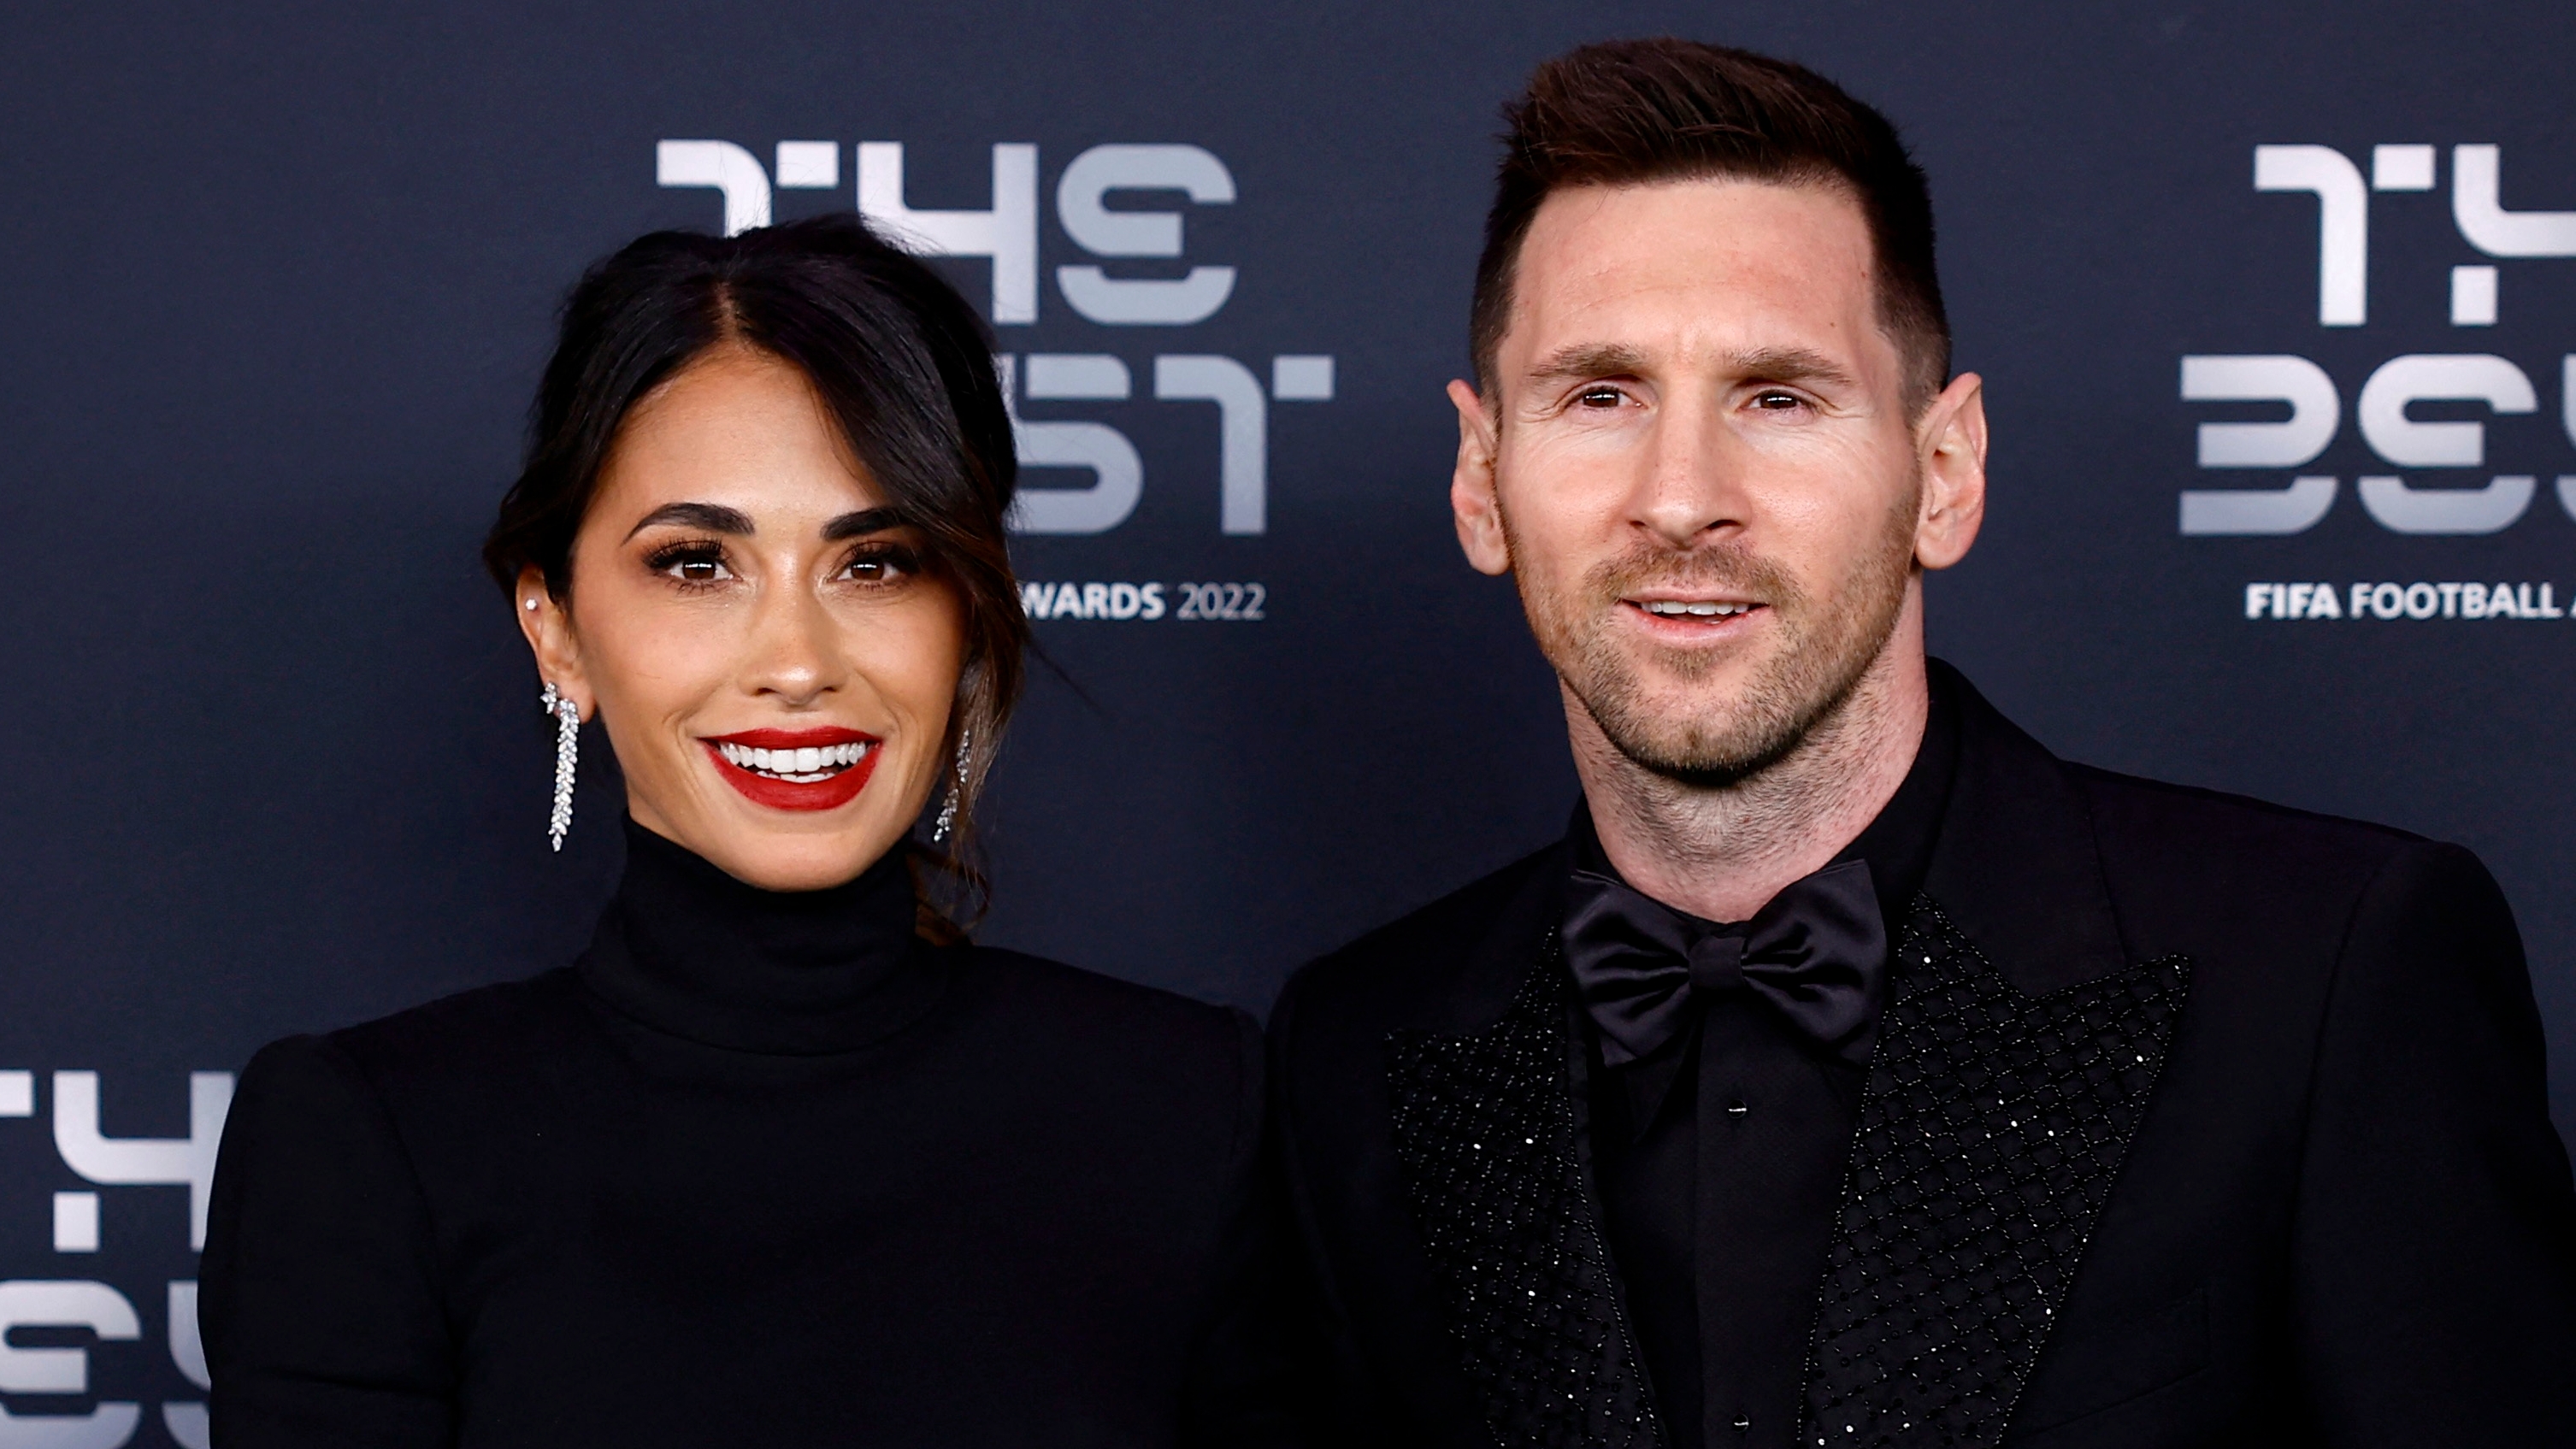 Soccer Football - The Best FIFA Football Awards - Salle Pleyel, Paris, France - February 27, 2023 Paris St Germain's Lionel Messi with Antonela Roccuzzo before the Best FIFA Football Awards REUTERS/Sarah Meyssonnier